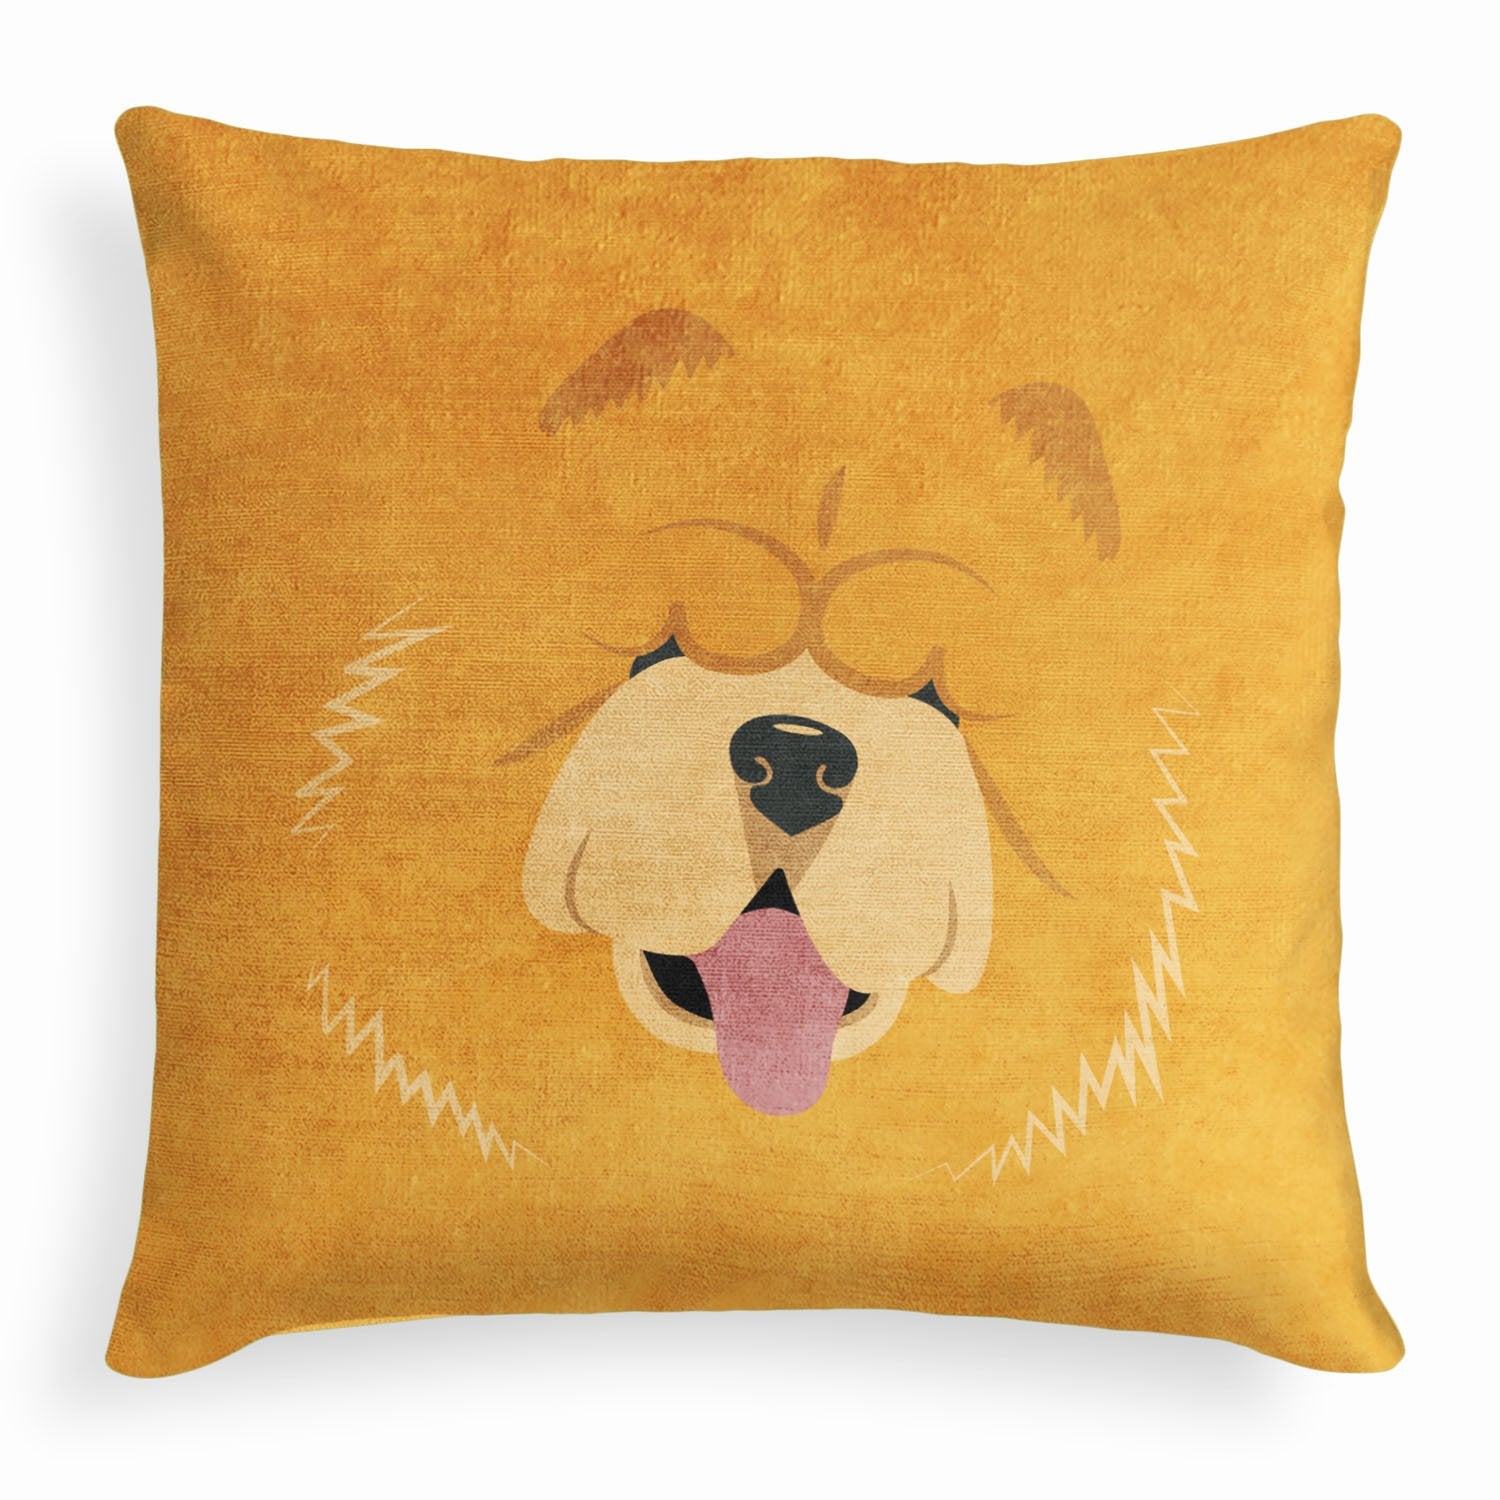 Chow Chow Square Pillow - Velvet -  - Knotty Tie Co.